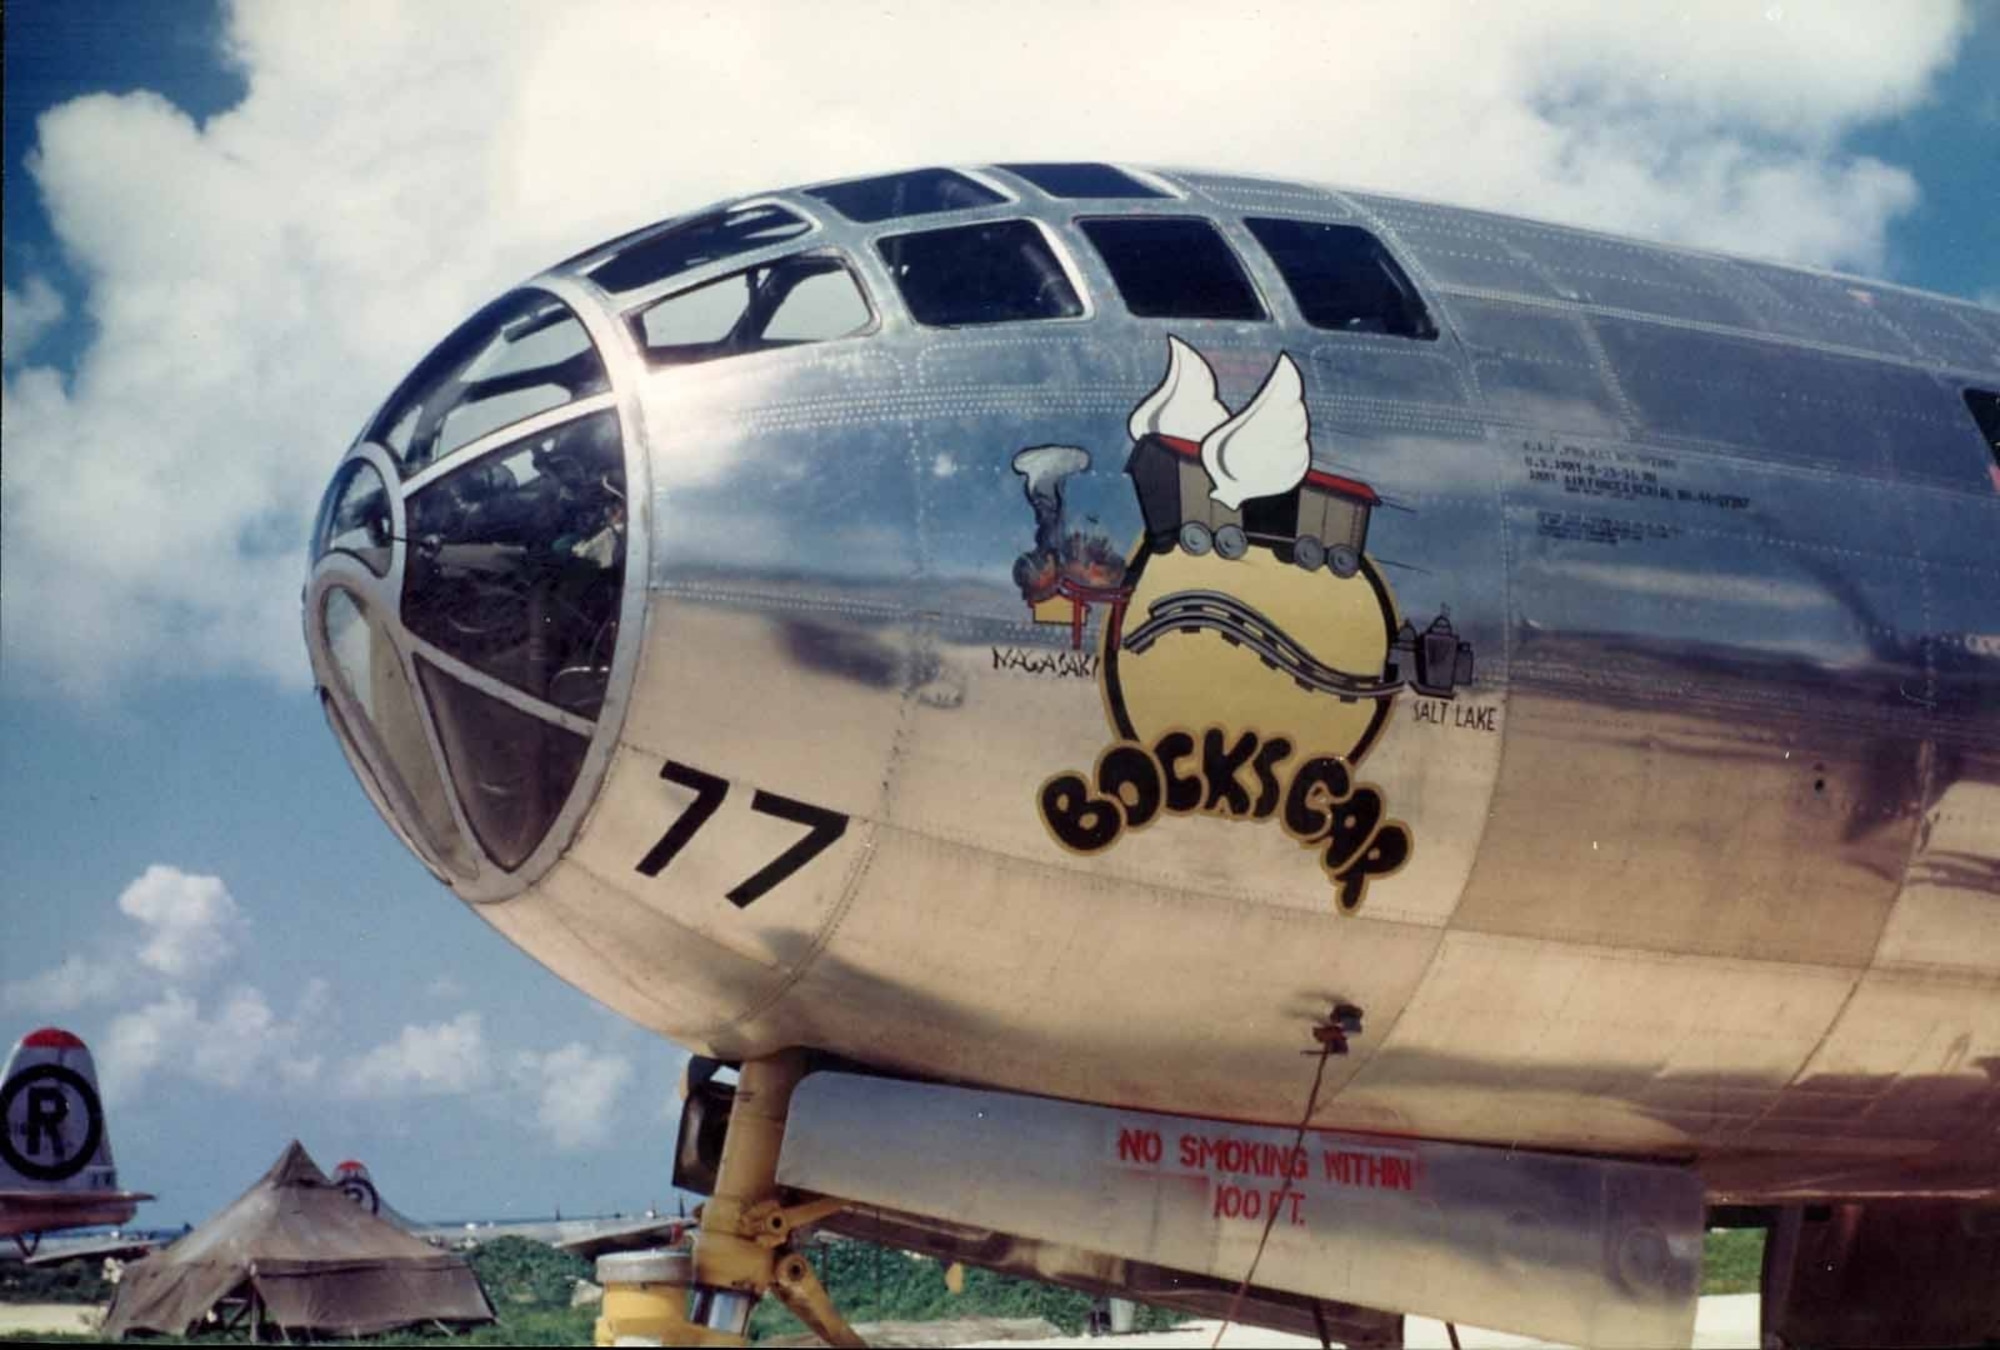 A historic photo of Bock's Car, a Boeing B-29 Superfortress bomber, credited with dropping the second atomic bomb on Nagasaki, three days after the Enola Gay dropped the first one on Hiroshima in August 1945. Bock's Car was part of the same squadron as the Enola Gay, the 393rd Bombardment Squadron, Heavy, of the 509th Composite Group. It was named after its commander Capt. Frederick C. Bock who, along with his crew C-13, participated in several bombing runs on Japan prior to dropping of the two atomic bombs.  (Courtesy photo)  
